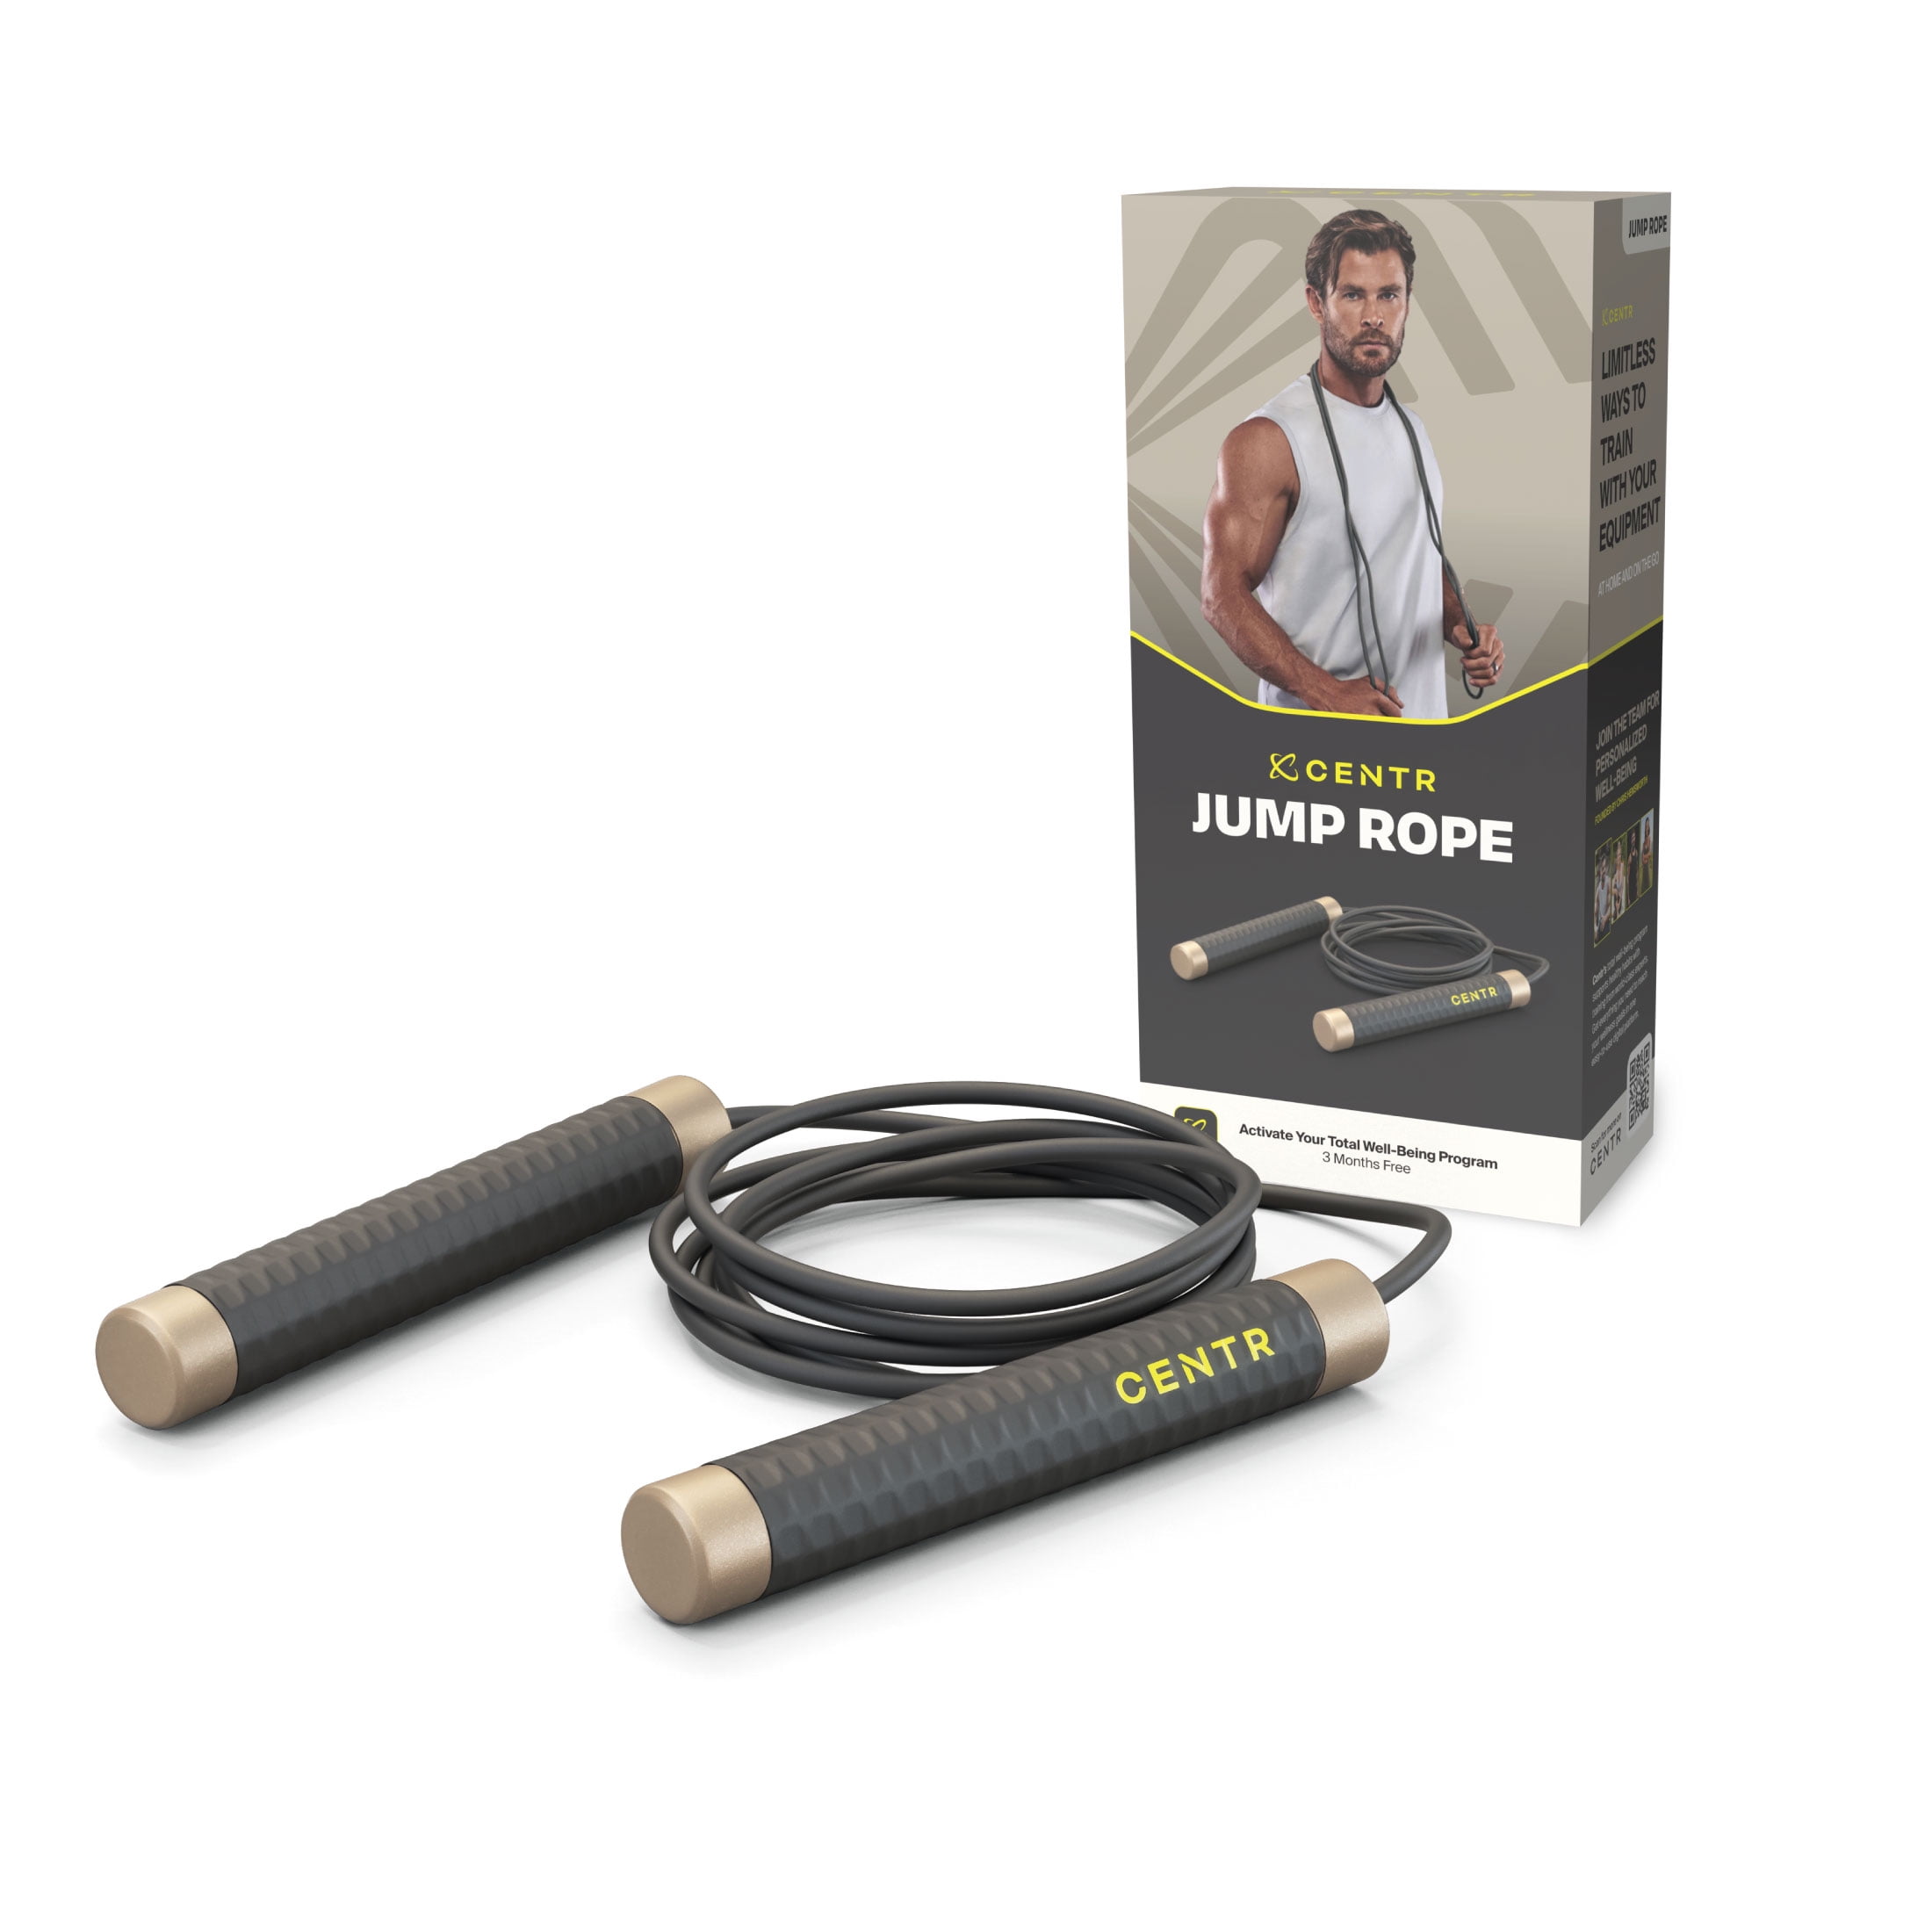 Centr By Chris Hemsworth Jump Rope for Cardio Training, Adjustable ...